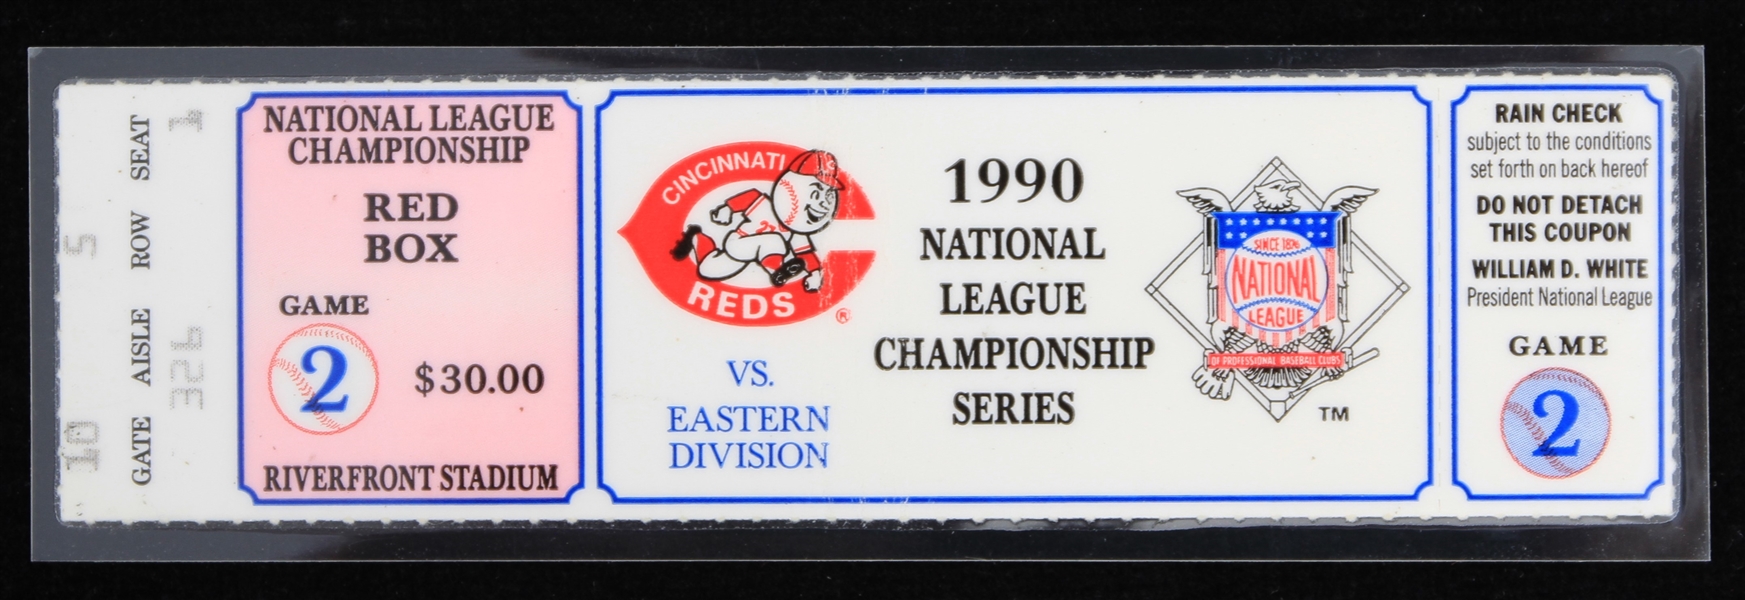 1990 Cincinnati Reds vs Eastern Division National League Championship Series Game 2 Ticket 